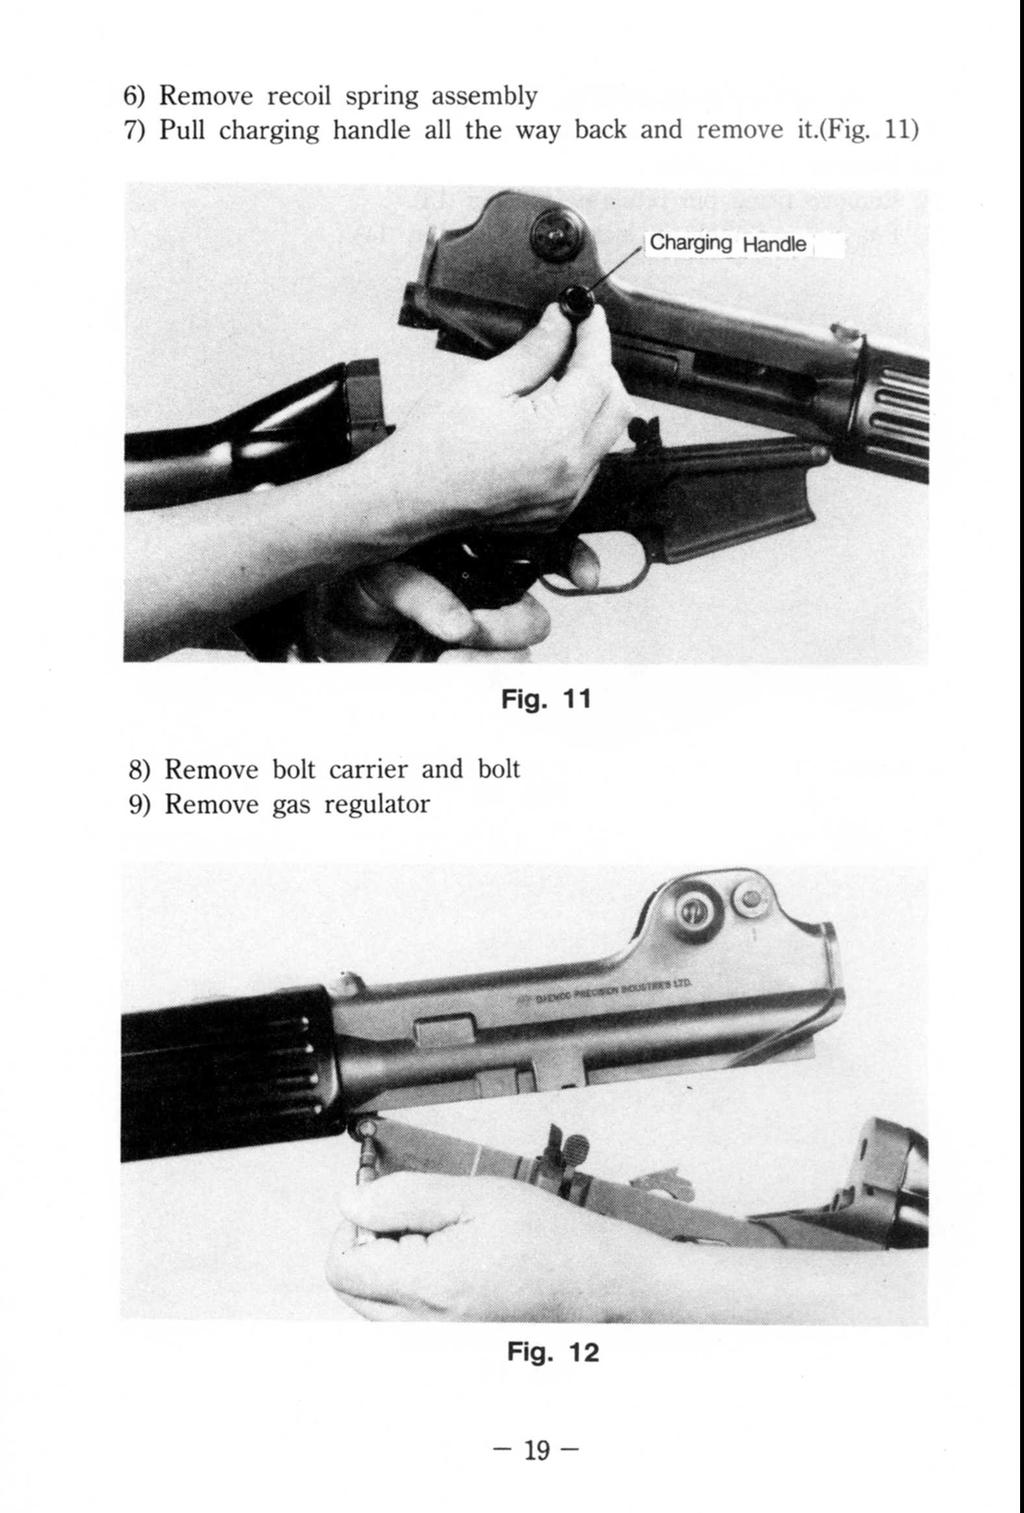 6) Remove recoil spring assembly 7) Pull charging handle all the way back and remove it.{fig. 11) --.